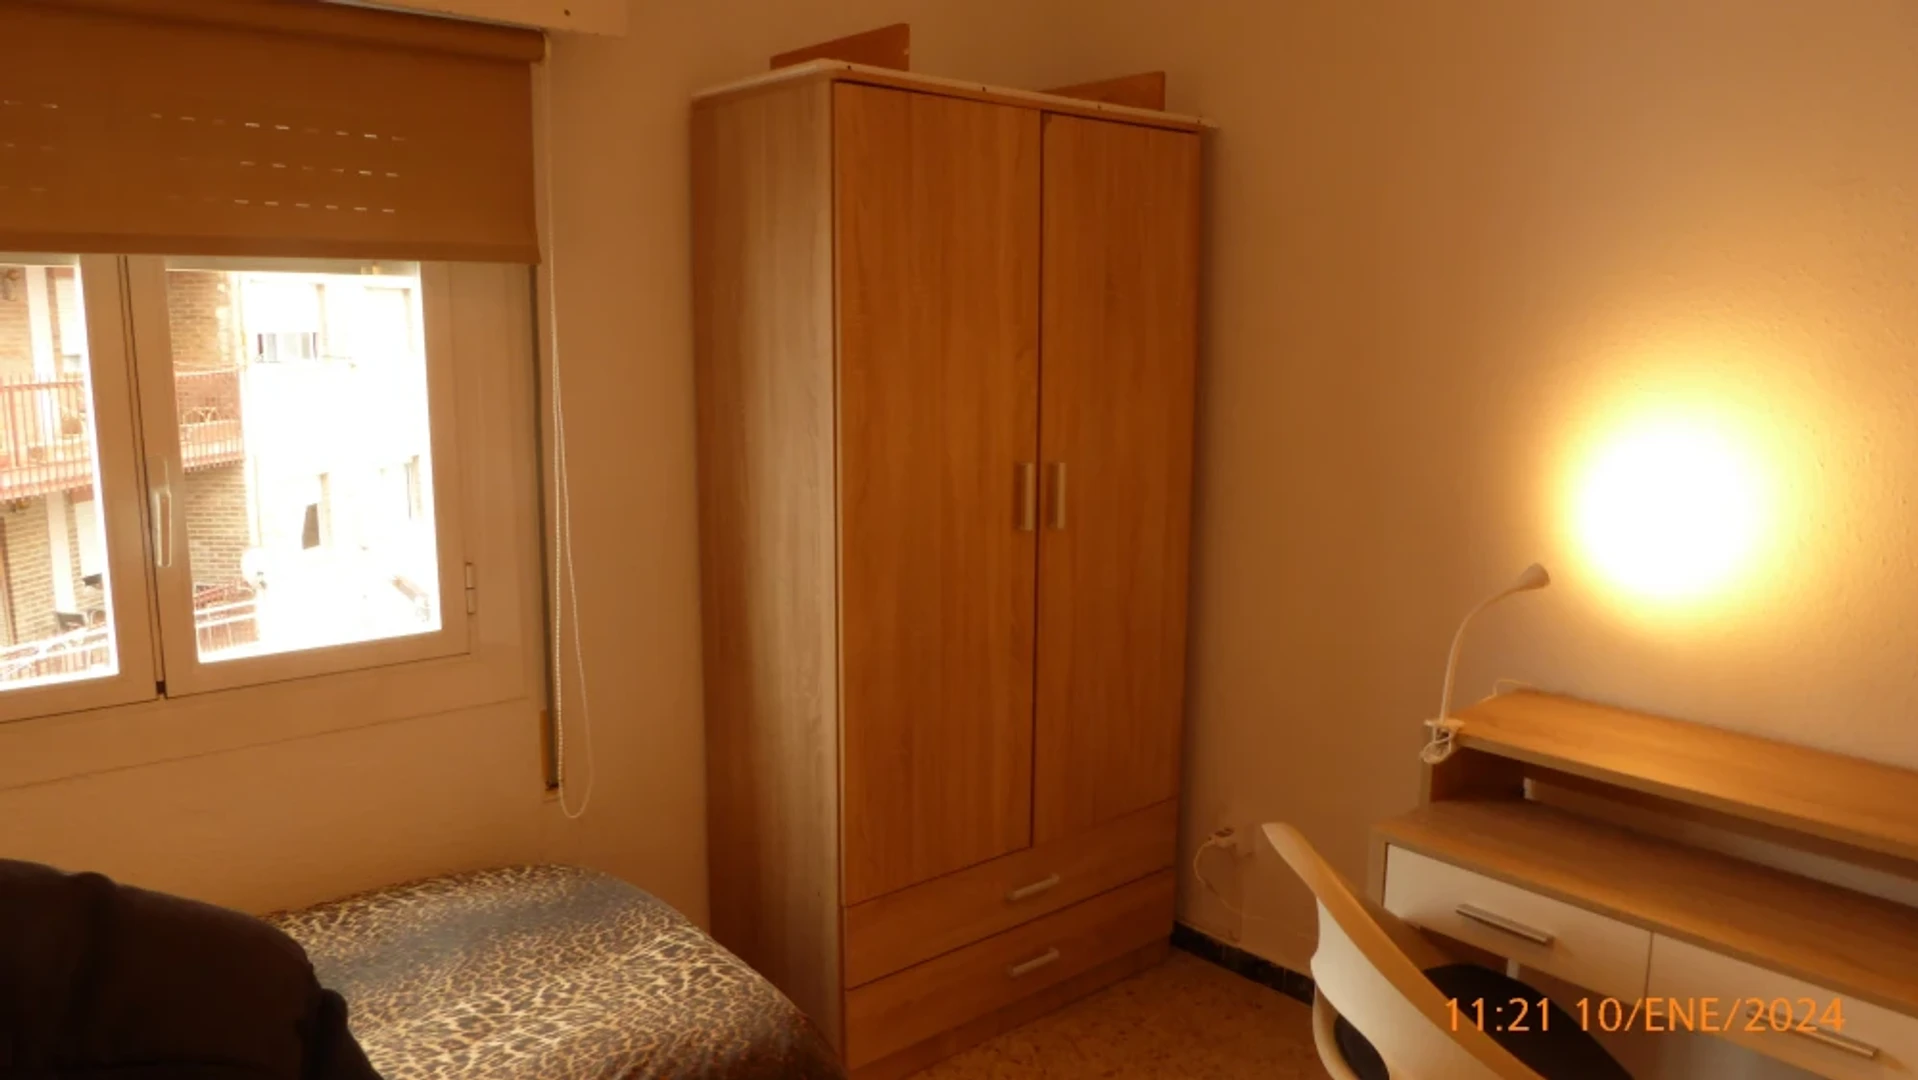 Cheap private room in Lleida